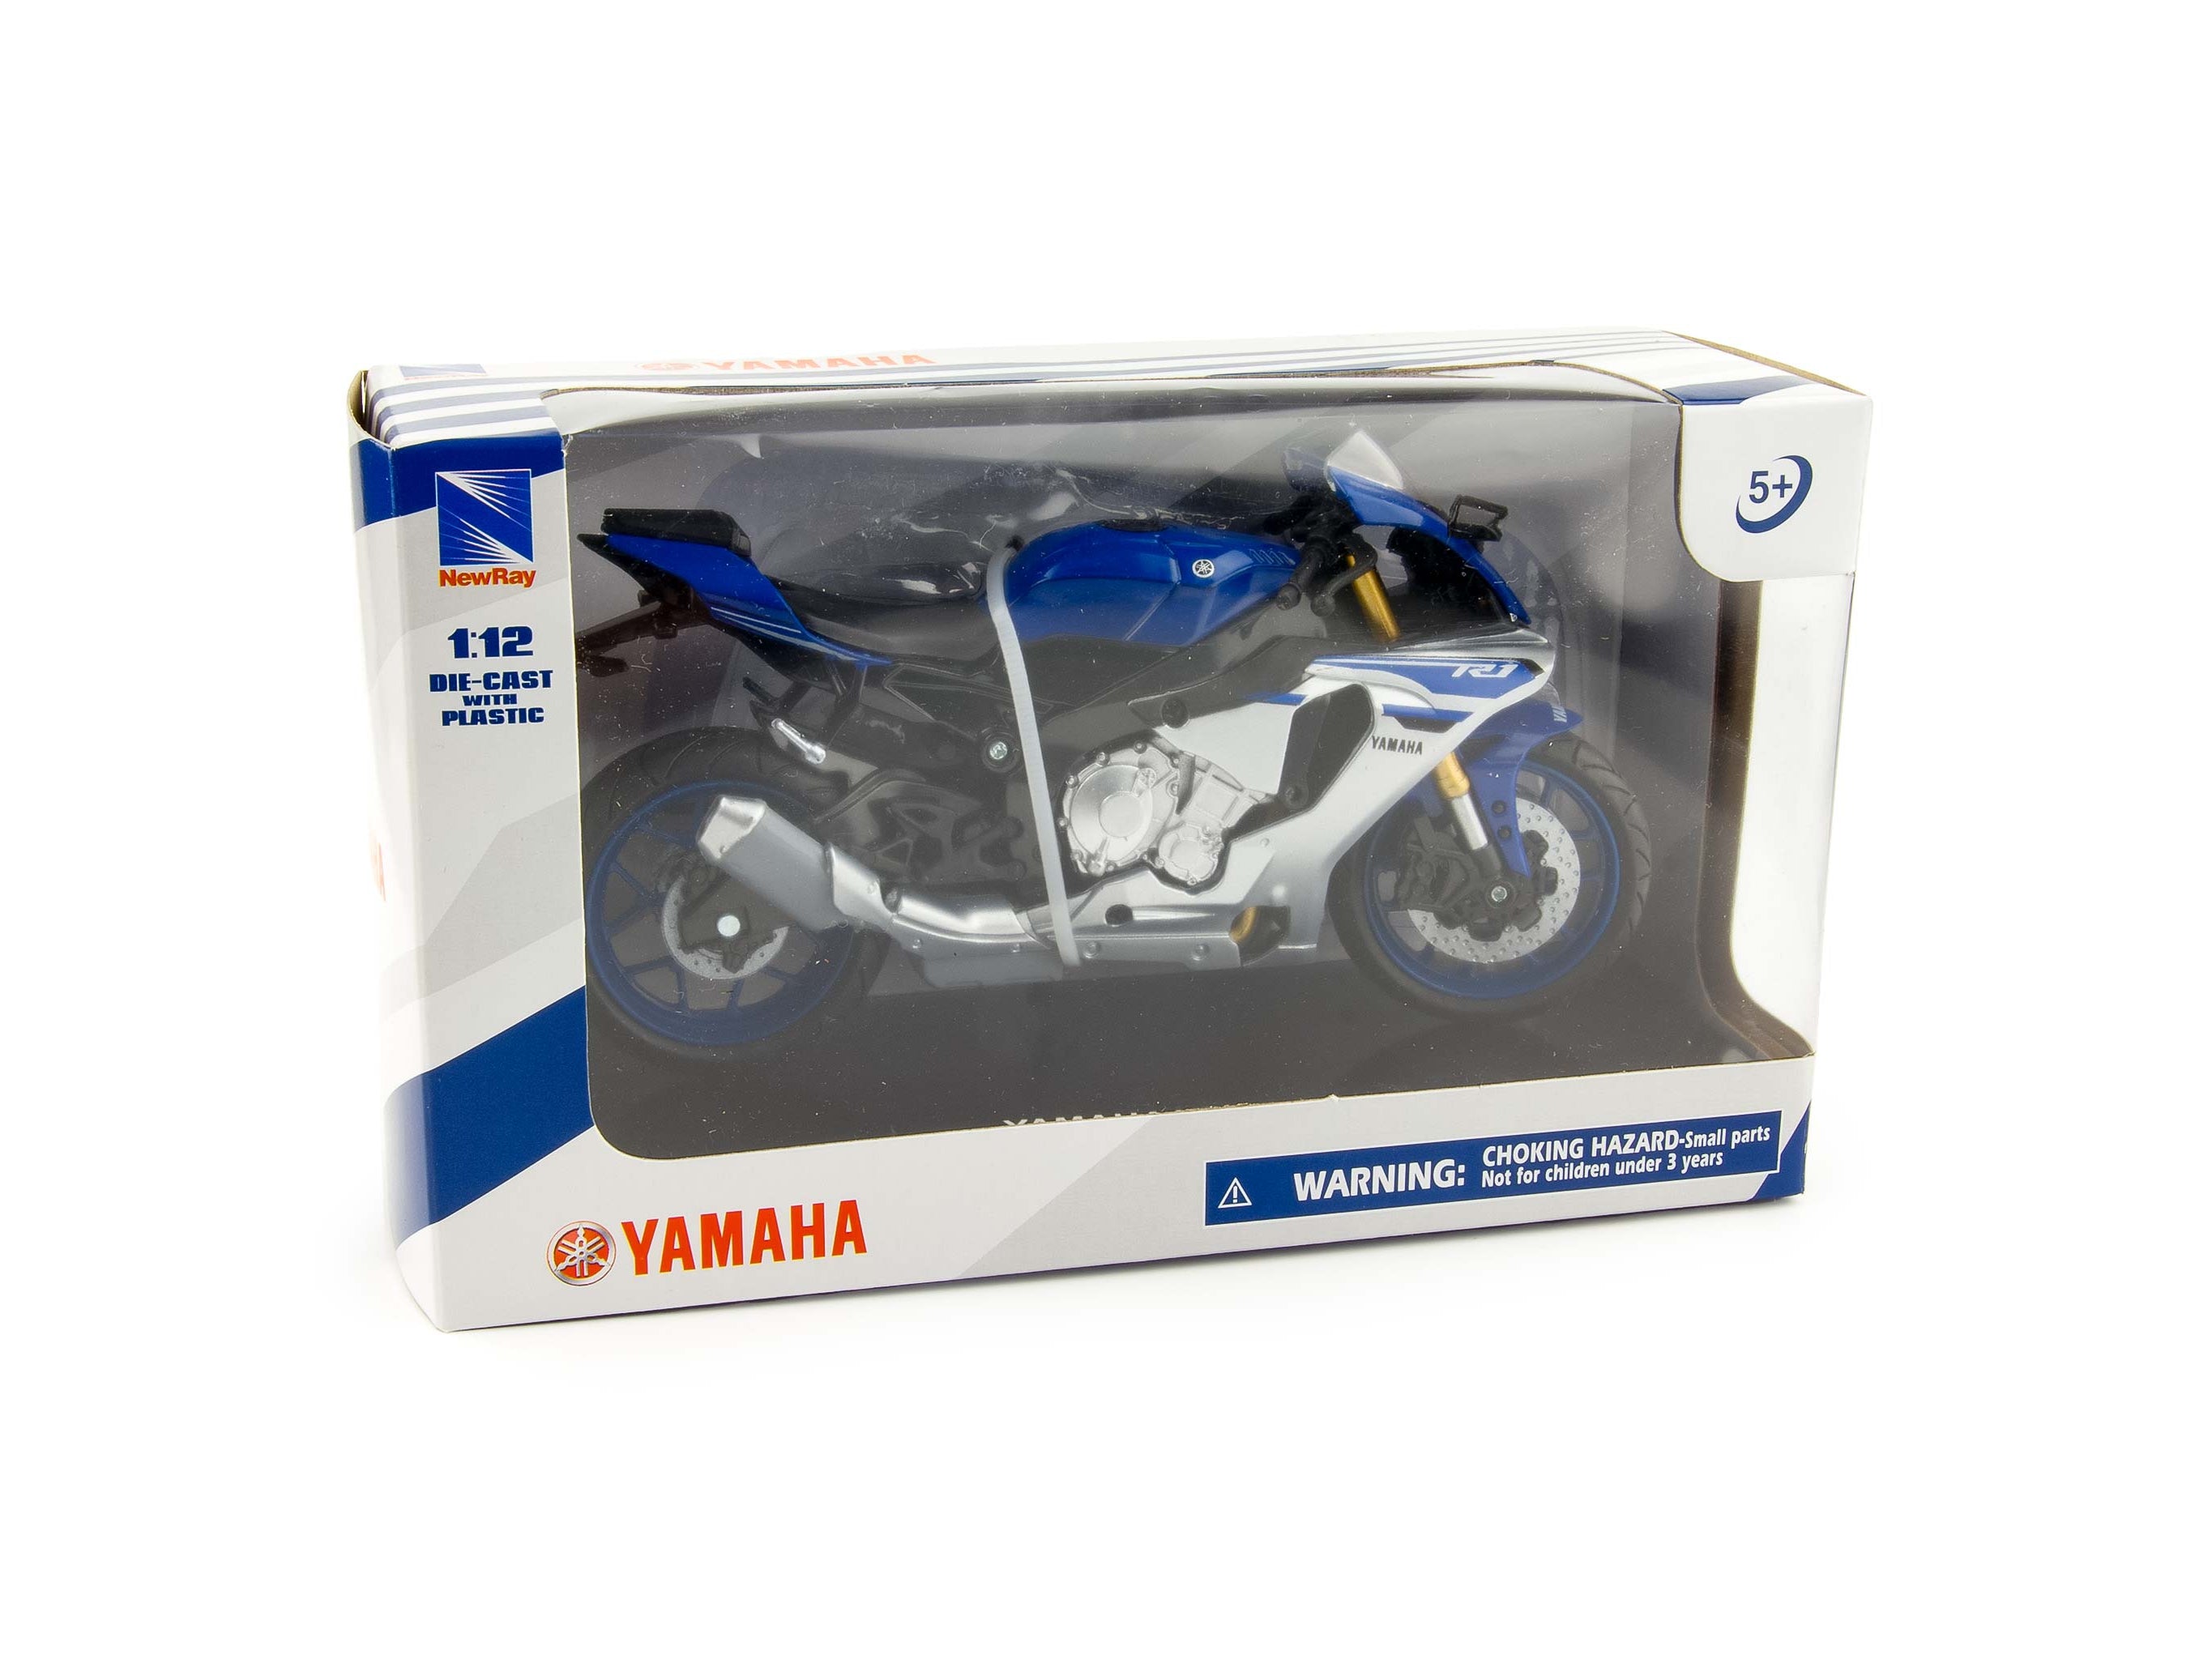 Yamaha YZF-R1 2015 blue - 1:12 Scale Diecast Model Motorcycle